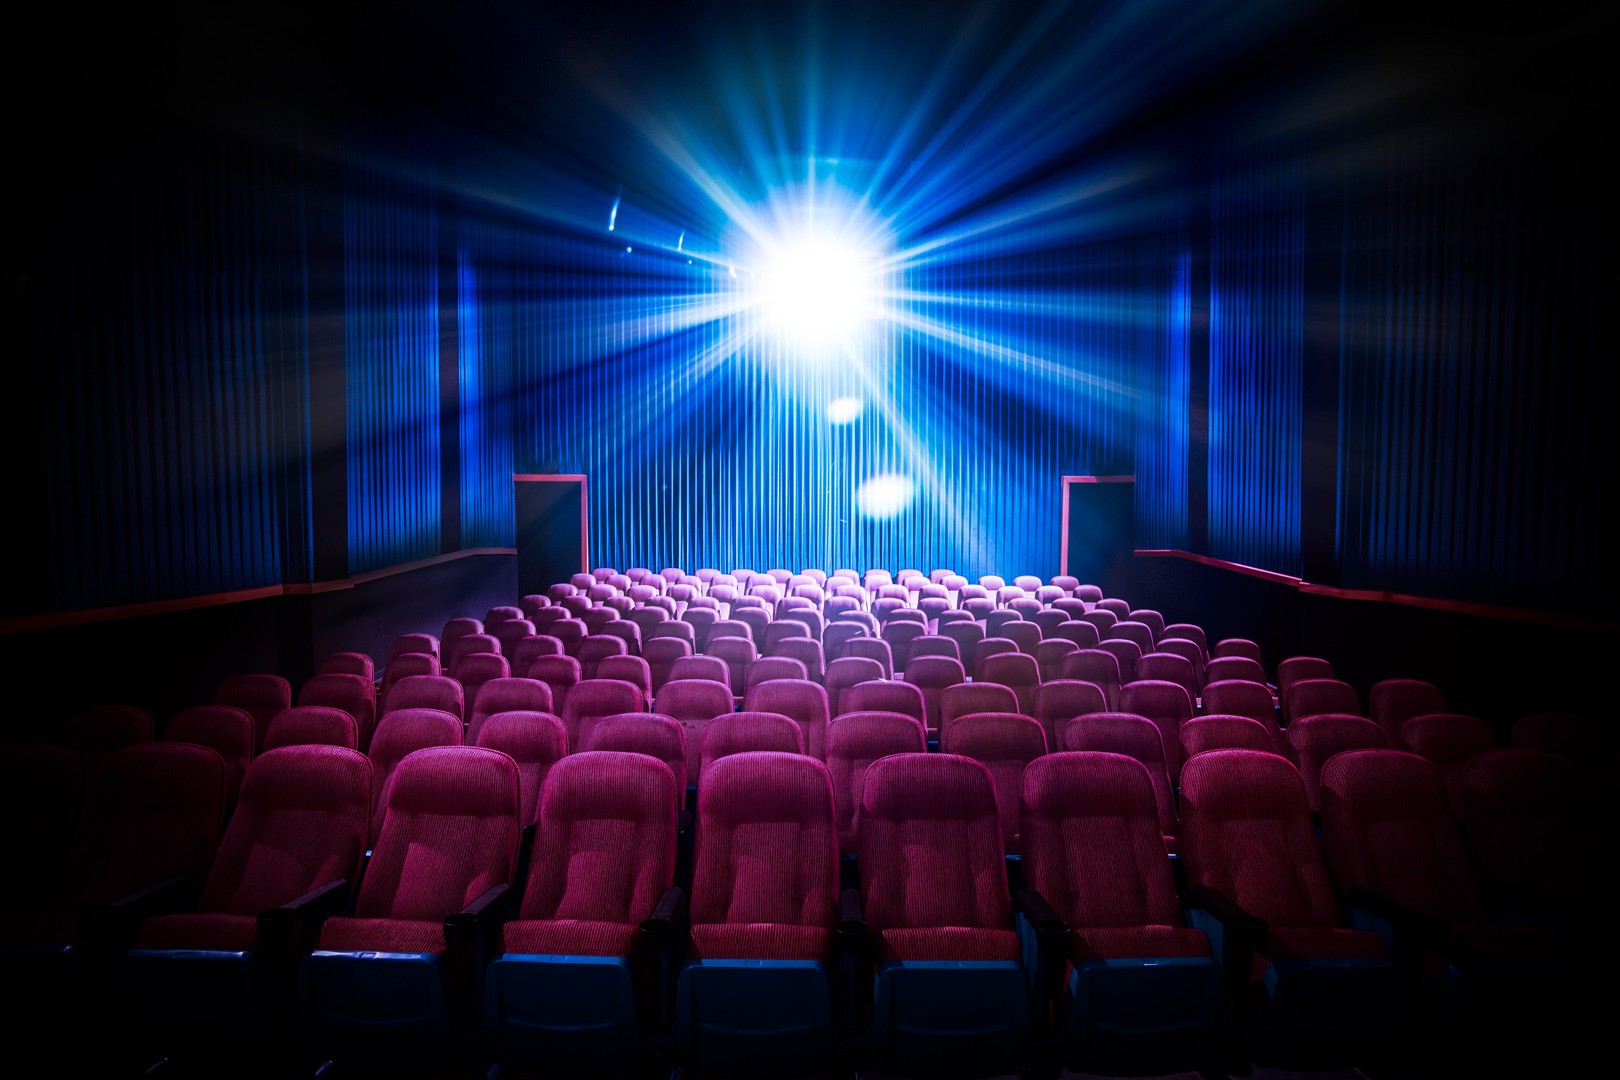 How To Detect Night Vision Camera In A Theatre